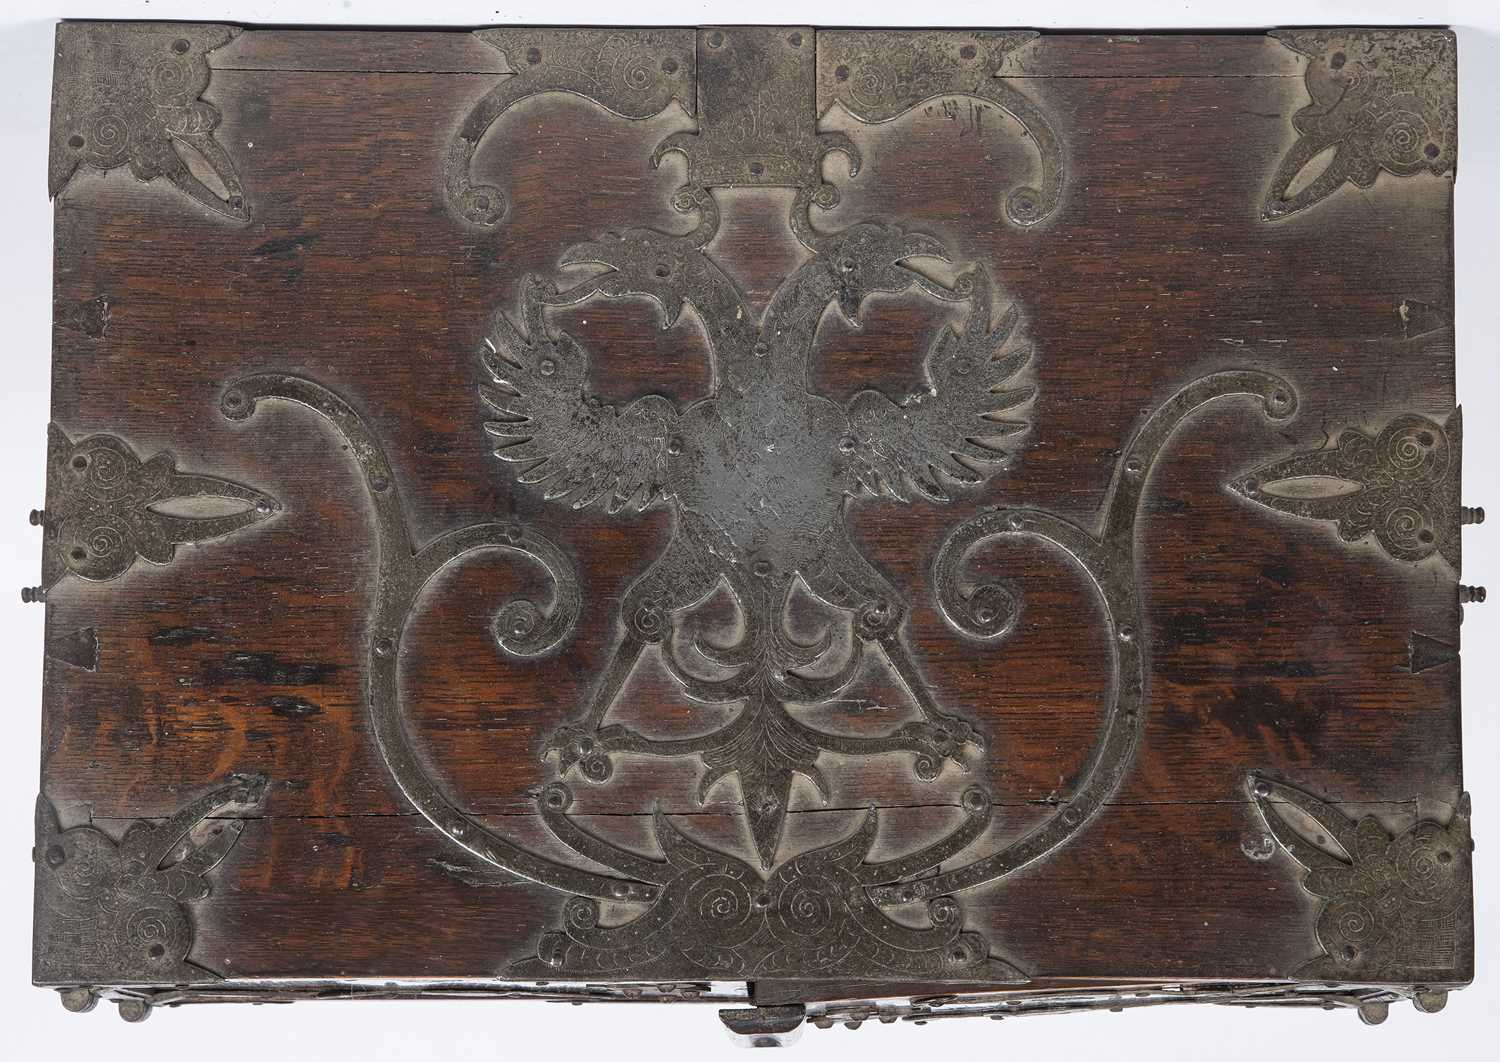 A 17th century German oak and metal bound table top cabinet of drawers, having a double headed eagle - Image 5 of 10